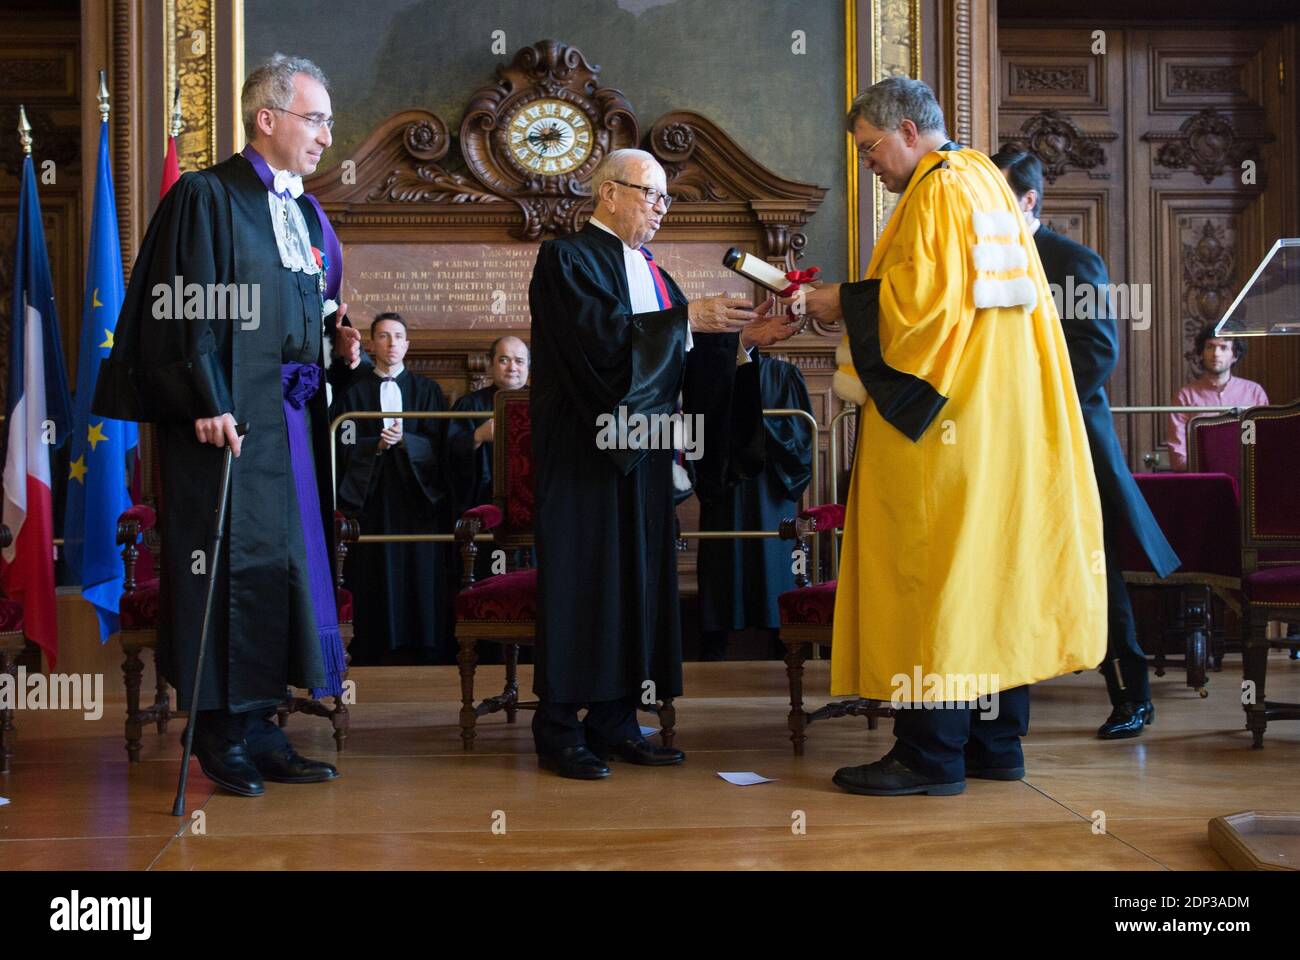 Tunisia's President Beji Caid Essebsi (C) is made doctor honoris causa of  Universite Paris 1 Pantheon-Sorbonne by Sorbonne University president  Philippe Boutry (R) as Paris Academy president Francois Weil looks on during